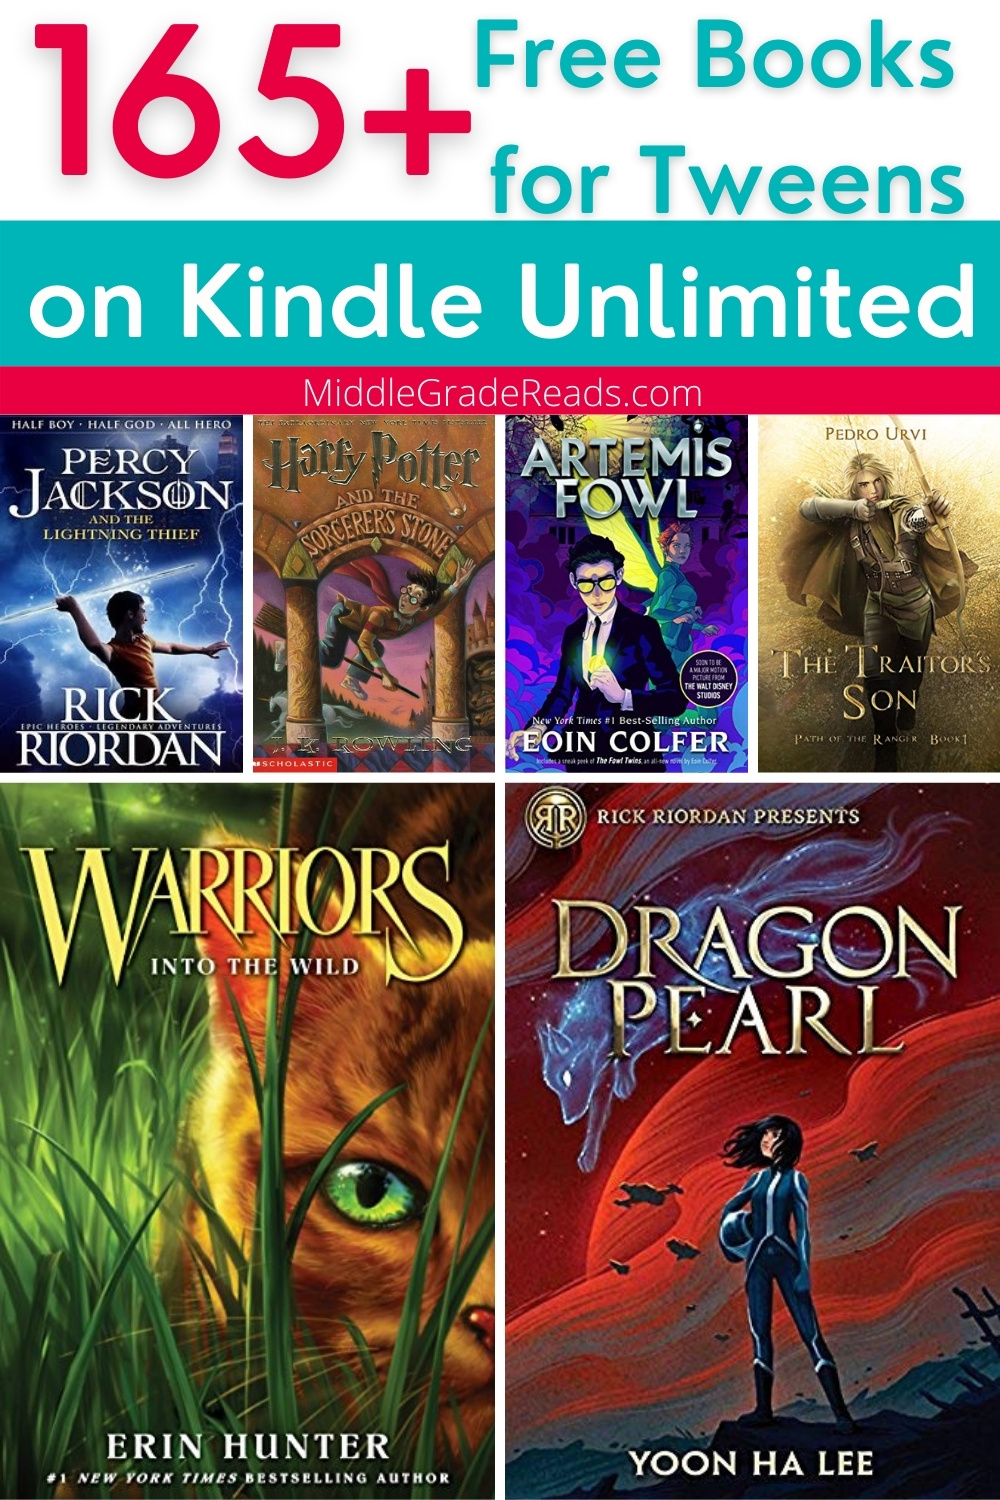 Did you know that there are a ton of really awesome middle-grade books that you can read for free on Kindle Unlimited? Here are 165+ to get you started!